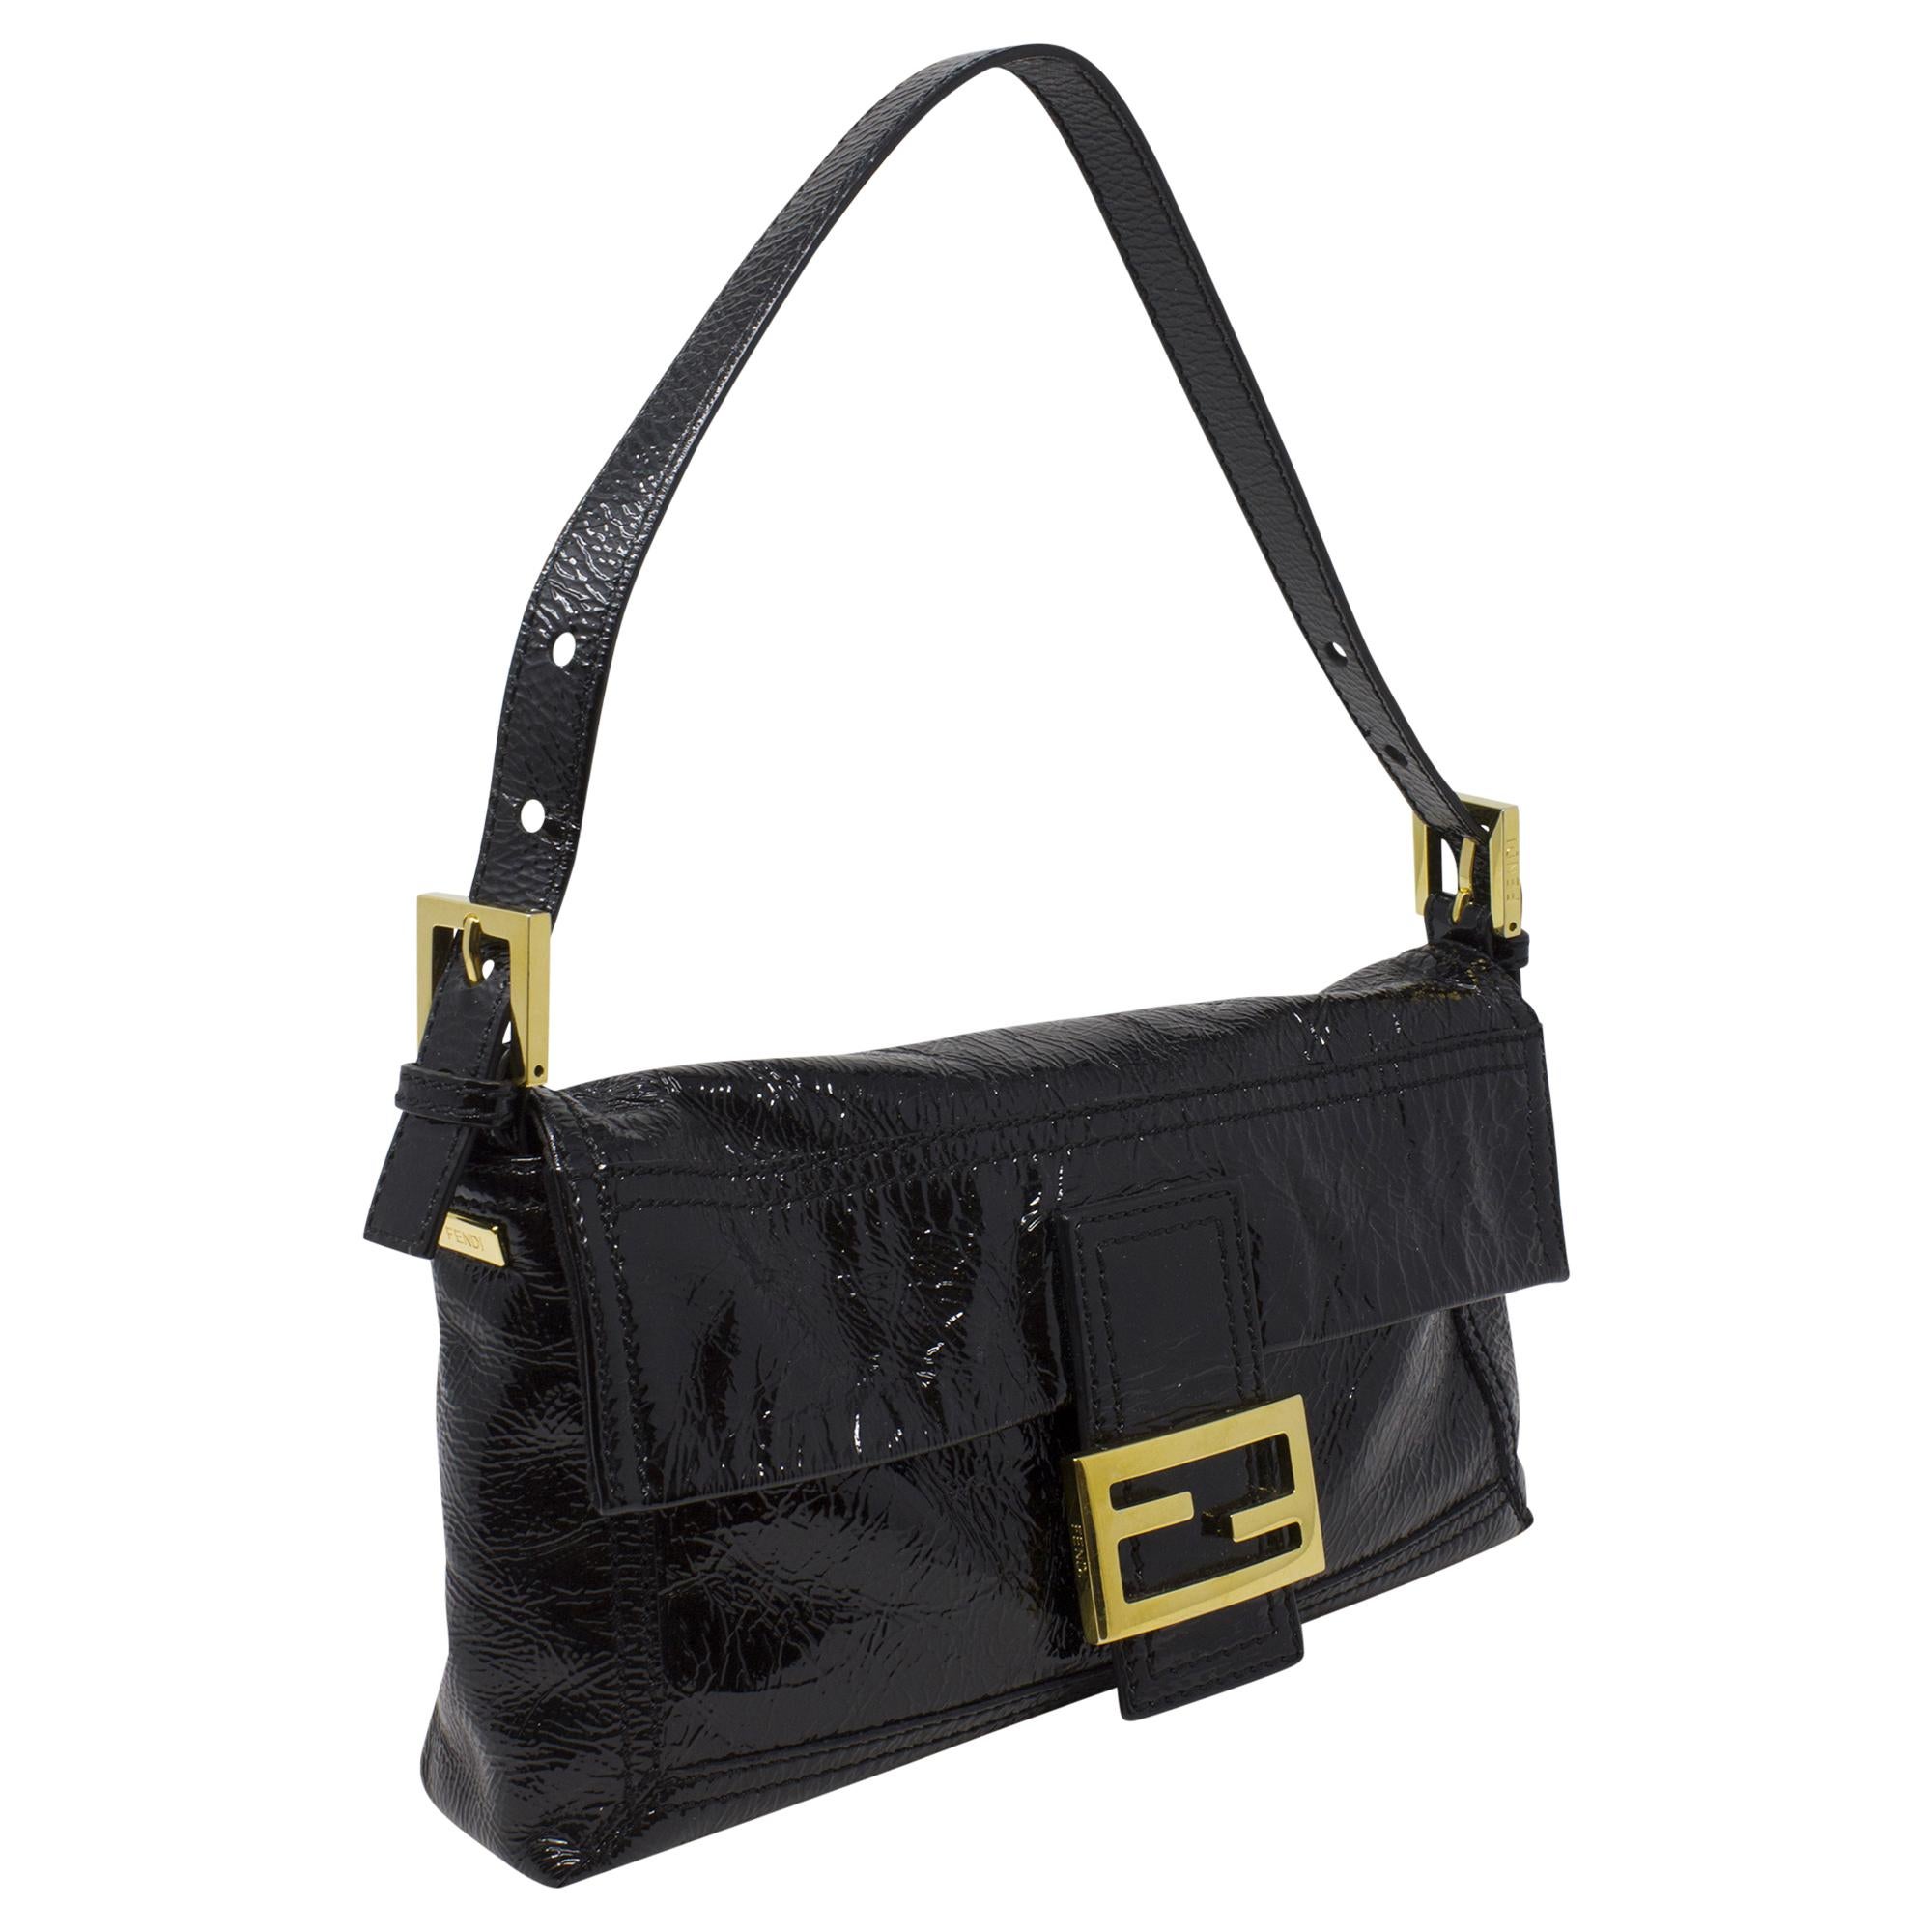 Introducing the Fendi Black Patent Baguette, a timeless classic for the modern fashionista. Crafted from luxurious black patent leather, this bag exudes sophistication and style. With its sleek design and gold hardware accents, it's perfect for any